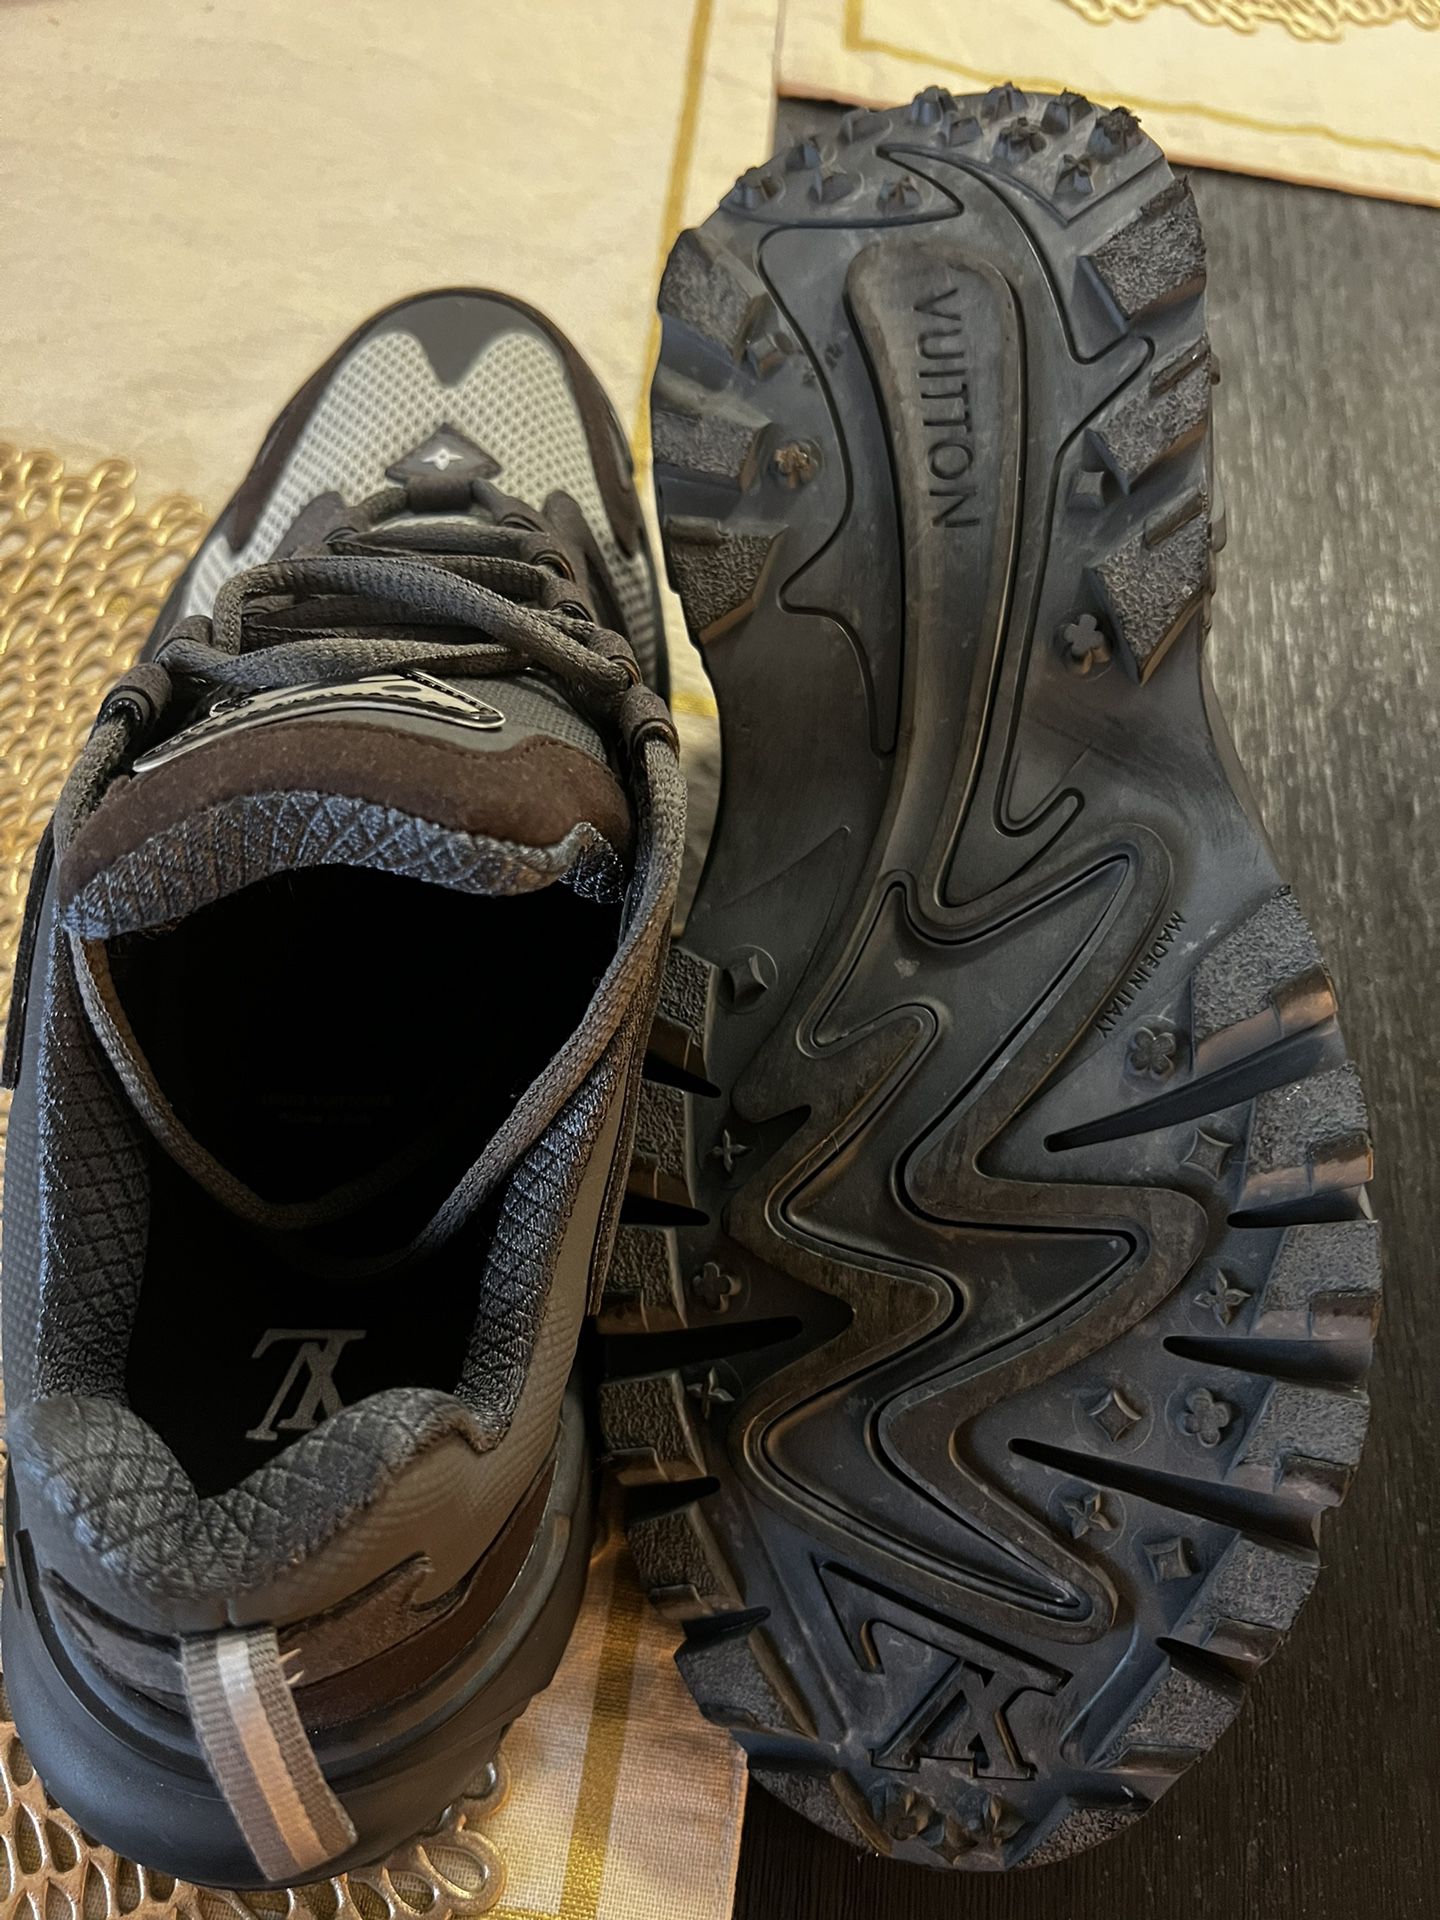 LV RUNNER TATIC SNEAKERS for Sale in Reading, PA - OfferUp